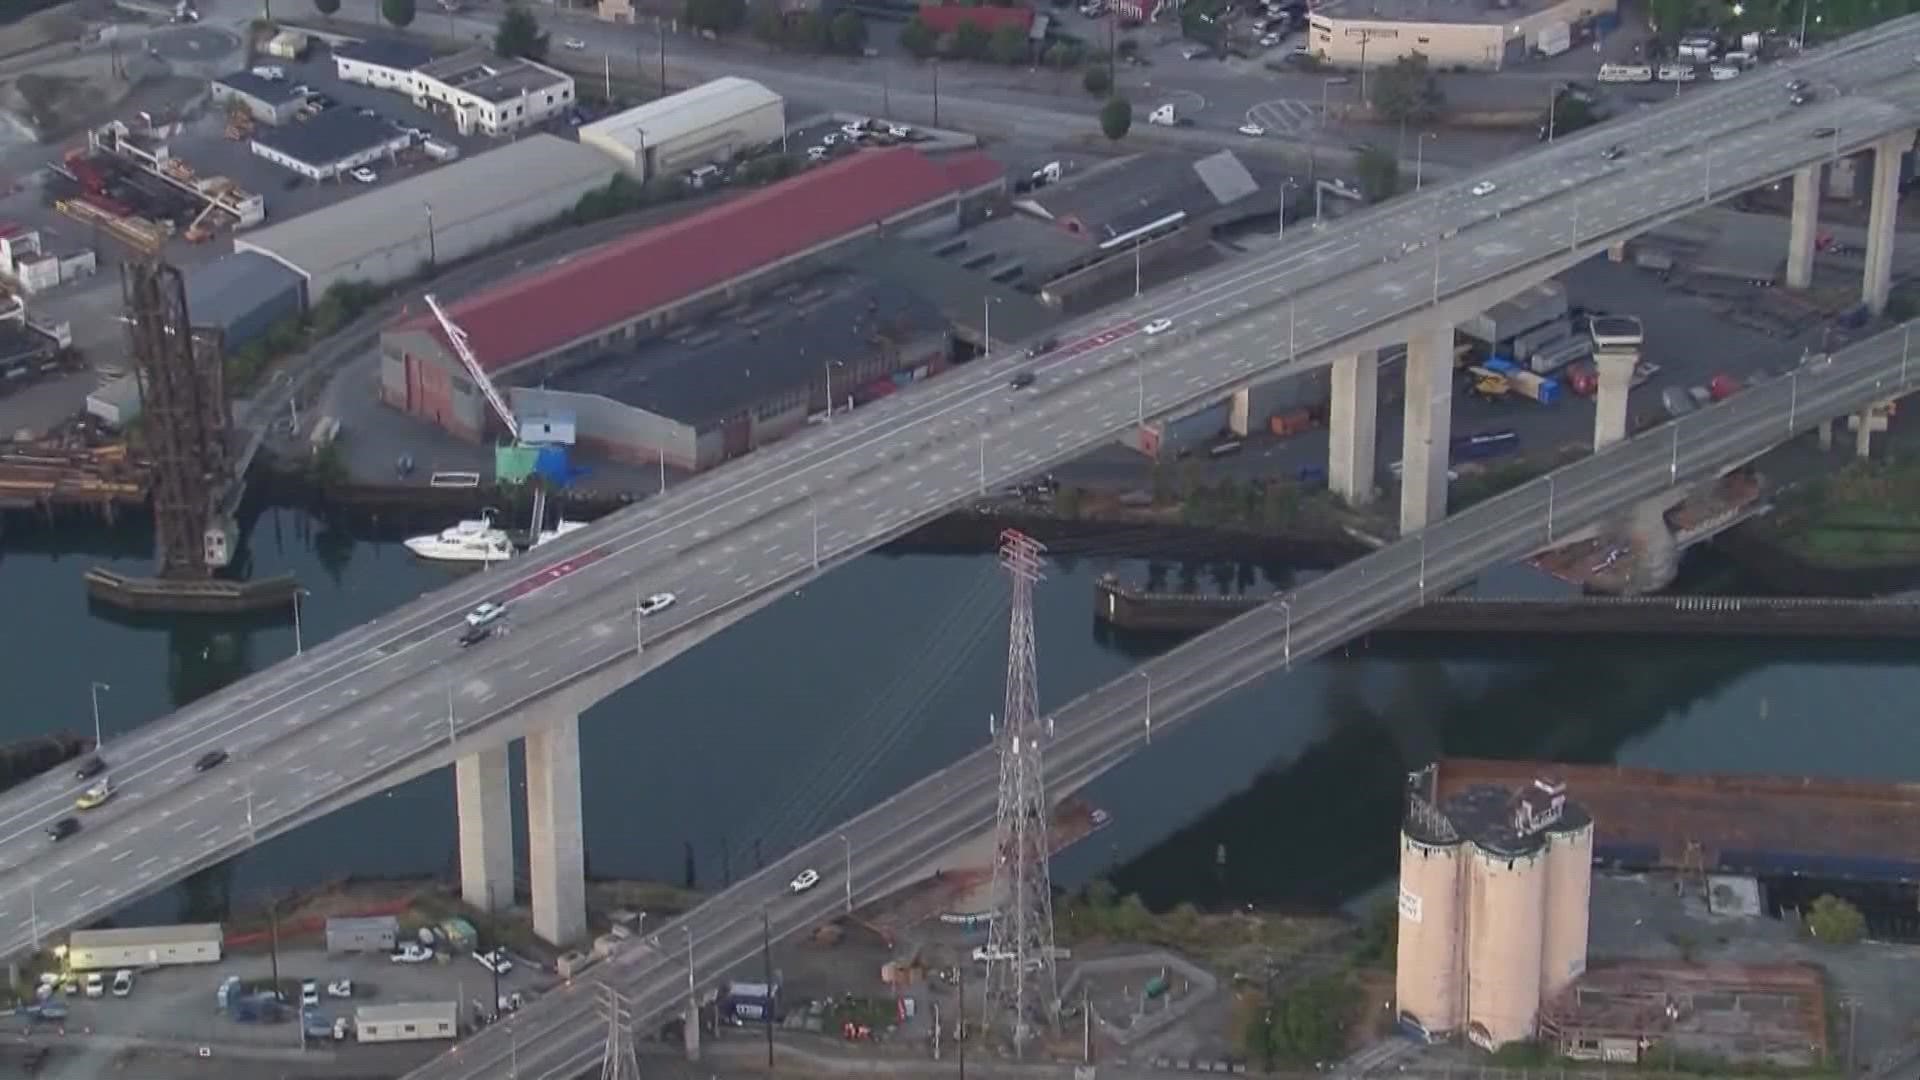 The low bridge will be closed to biking, walking, driving and freight traffic.